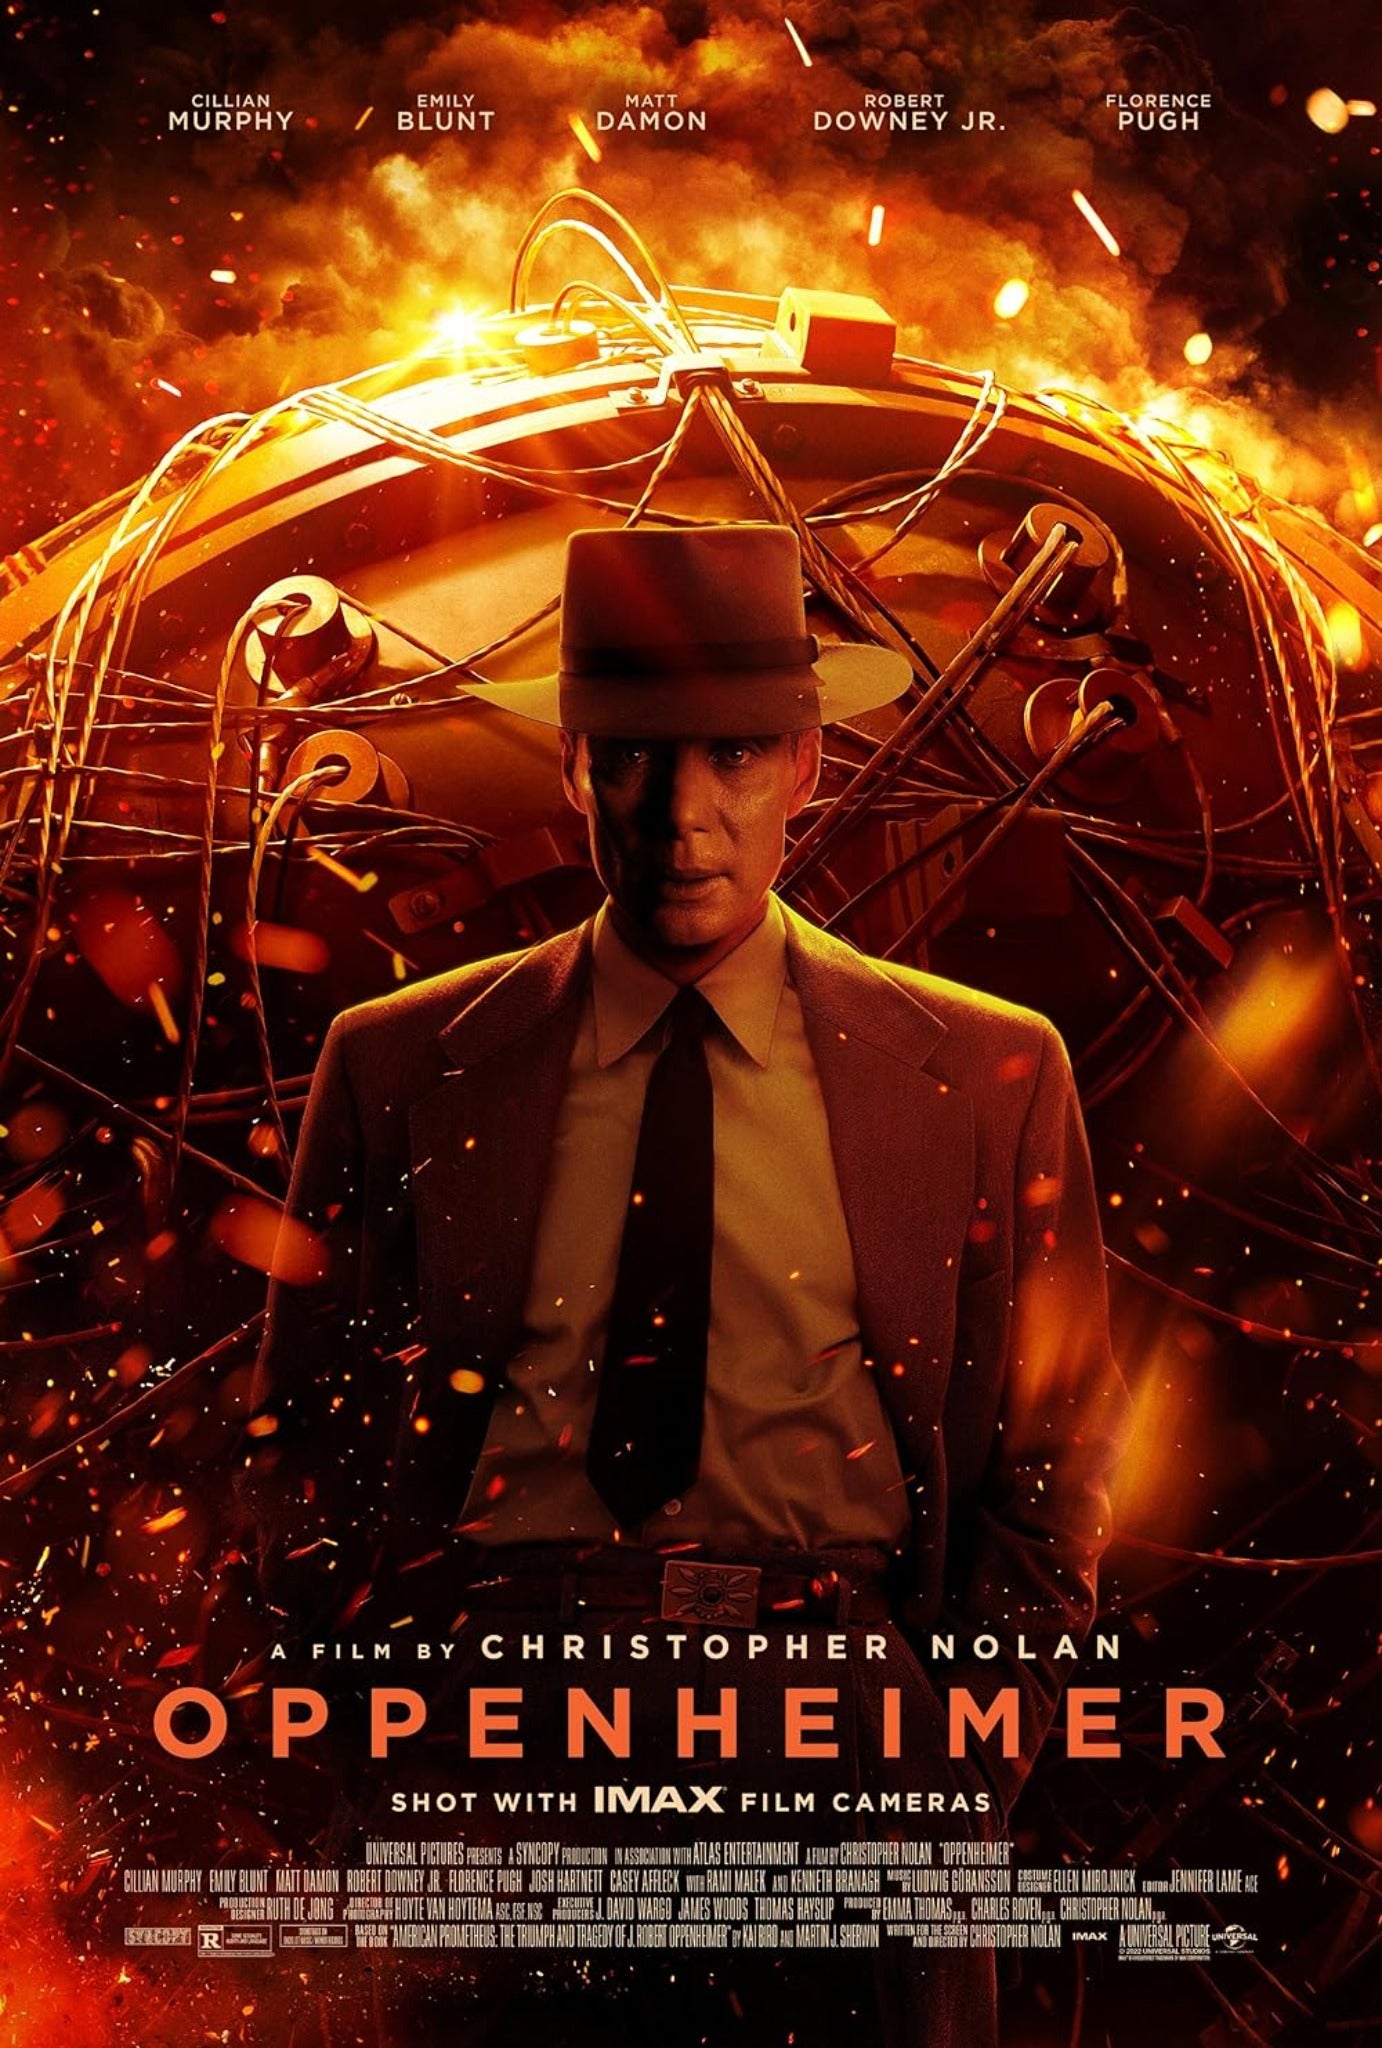 Oppenheimer 2023 |Thriller | Mystery | 3 hours | 83% liked this film Google users | 1080p MP4 | Digital Download